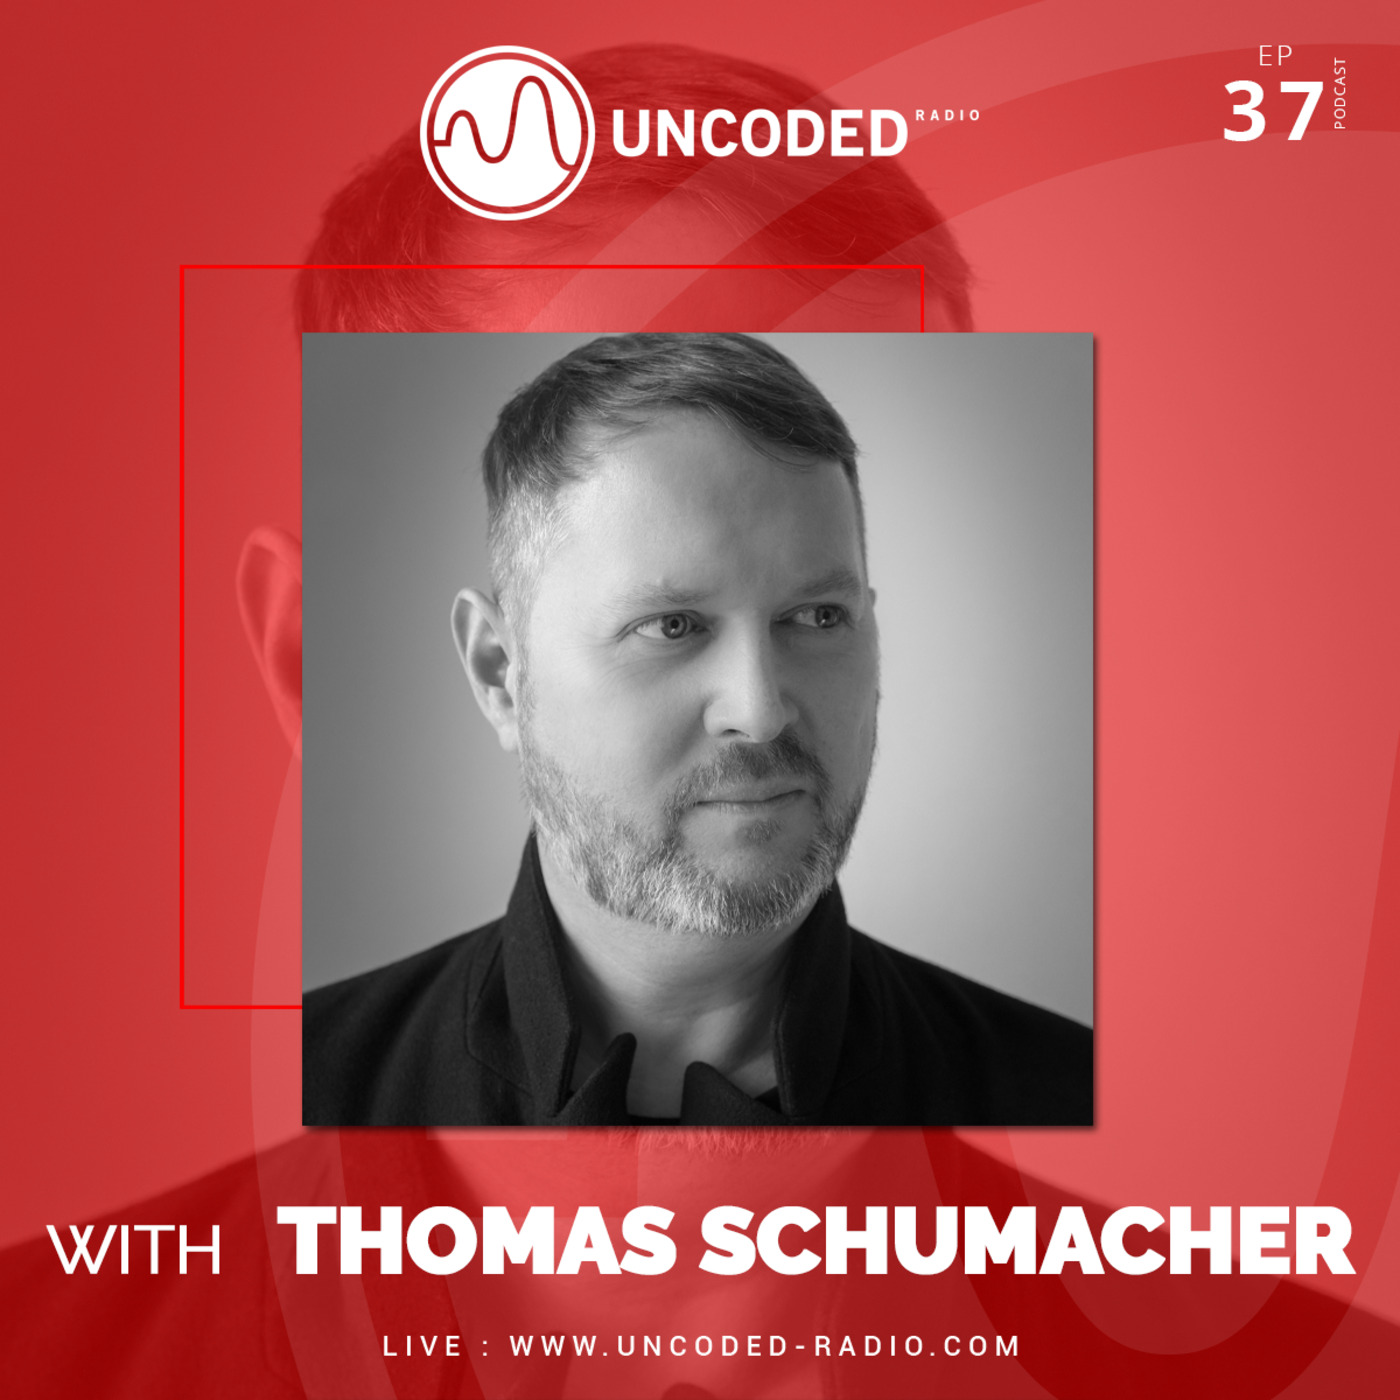 Uncoded Radio Present Uncoded Session #EP37 by Thomas Schumacher